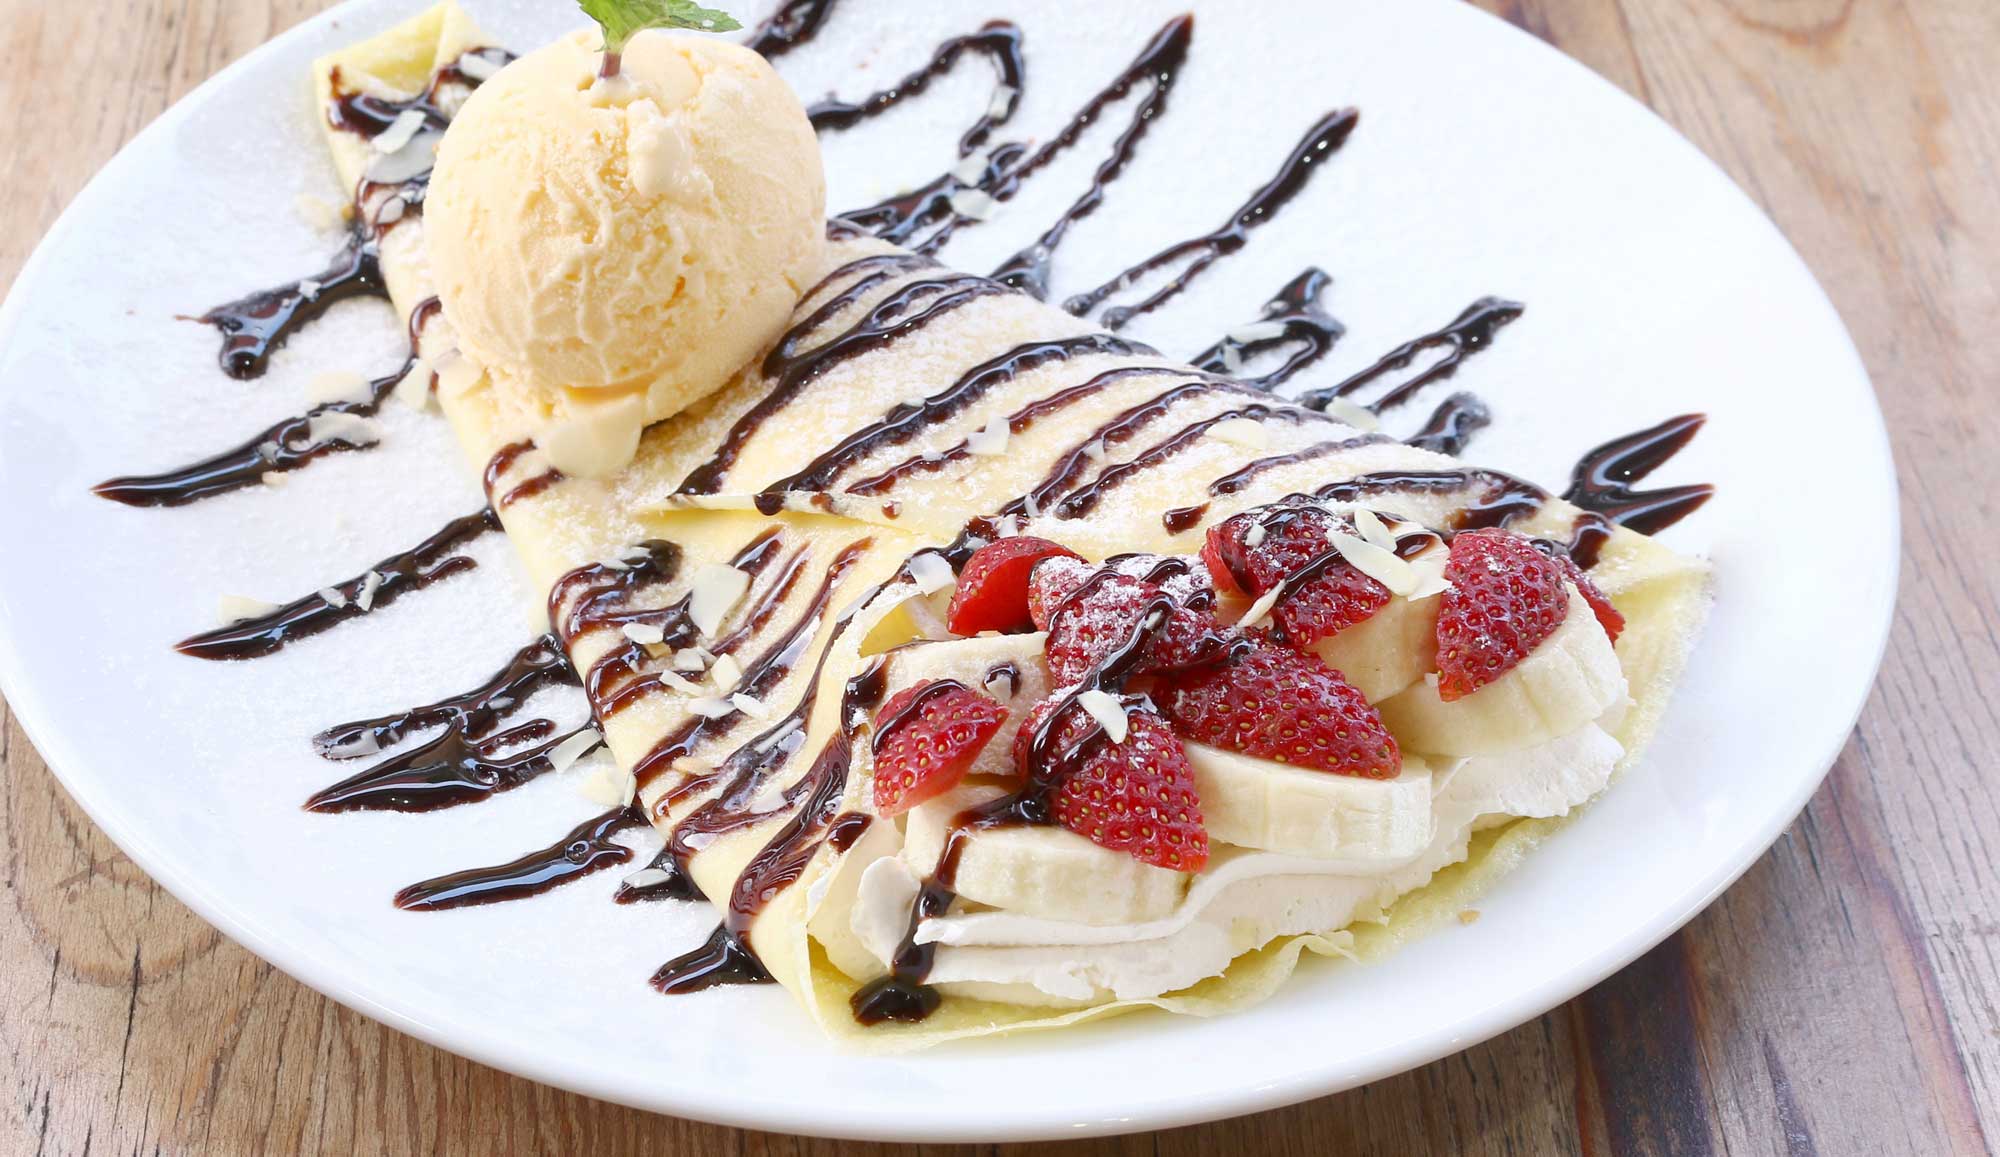 Strawberry banana crepe plate with Nutella